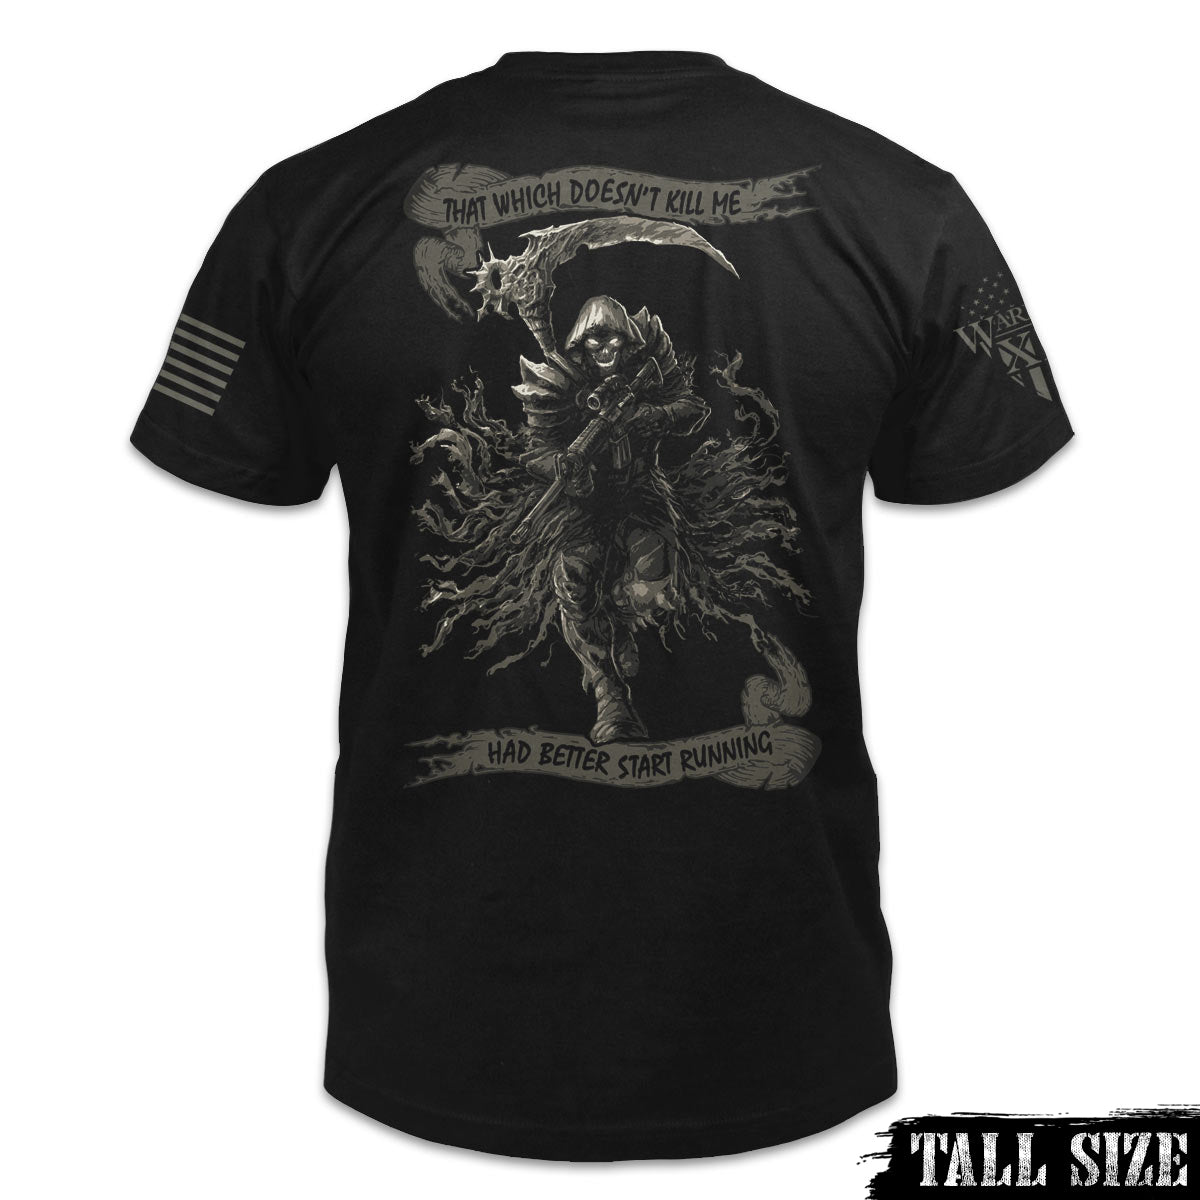 A black tall size shirt with the words "That Which Doesn't Kill Me Had Better Start Running" with a Reaper holding an AR-15 printed on the back of the shirt.